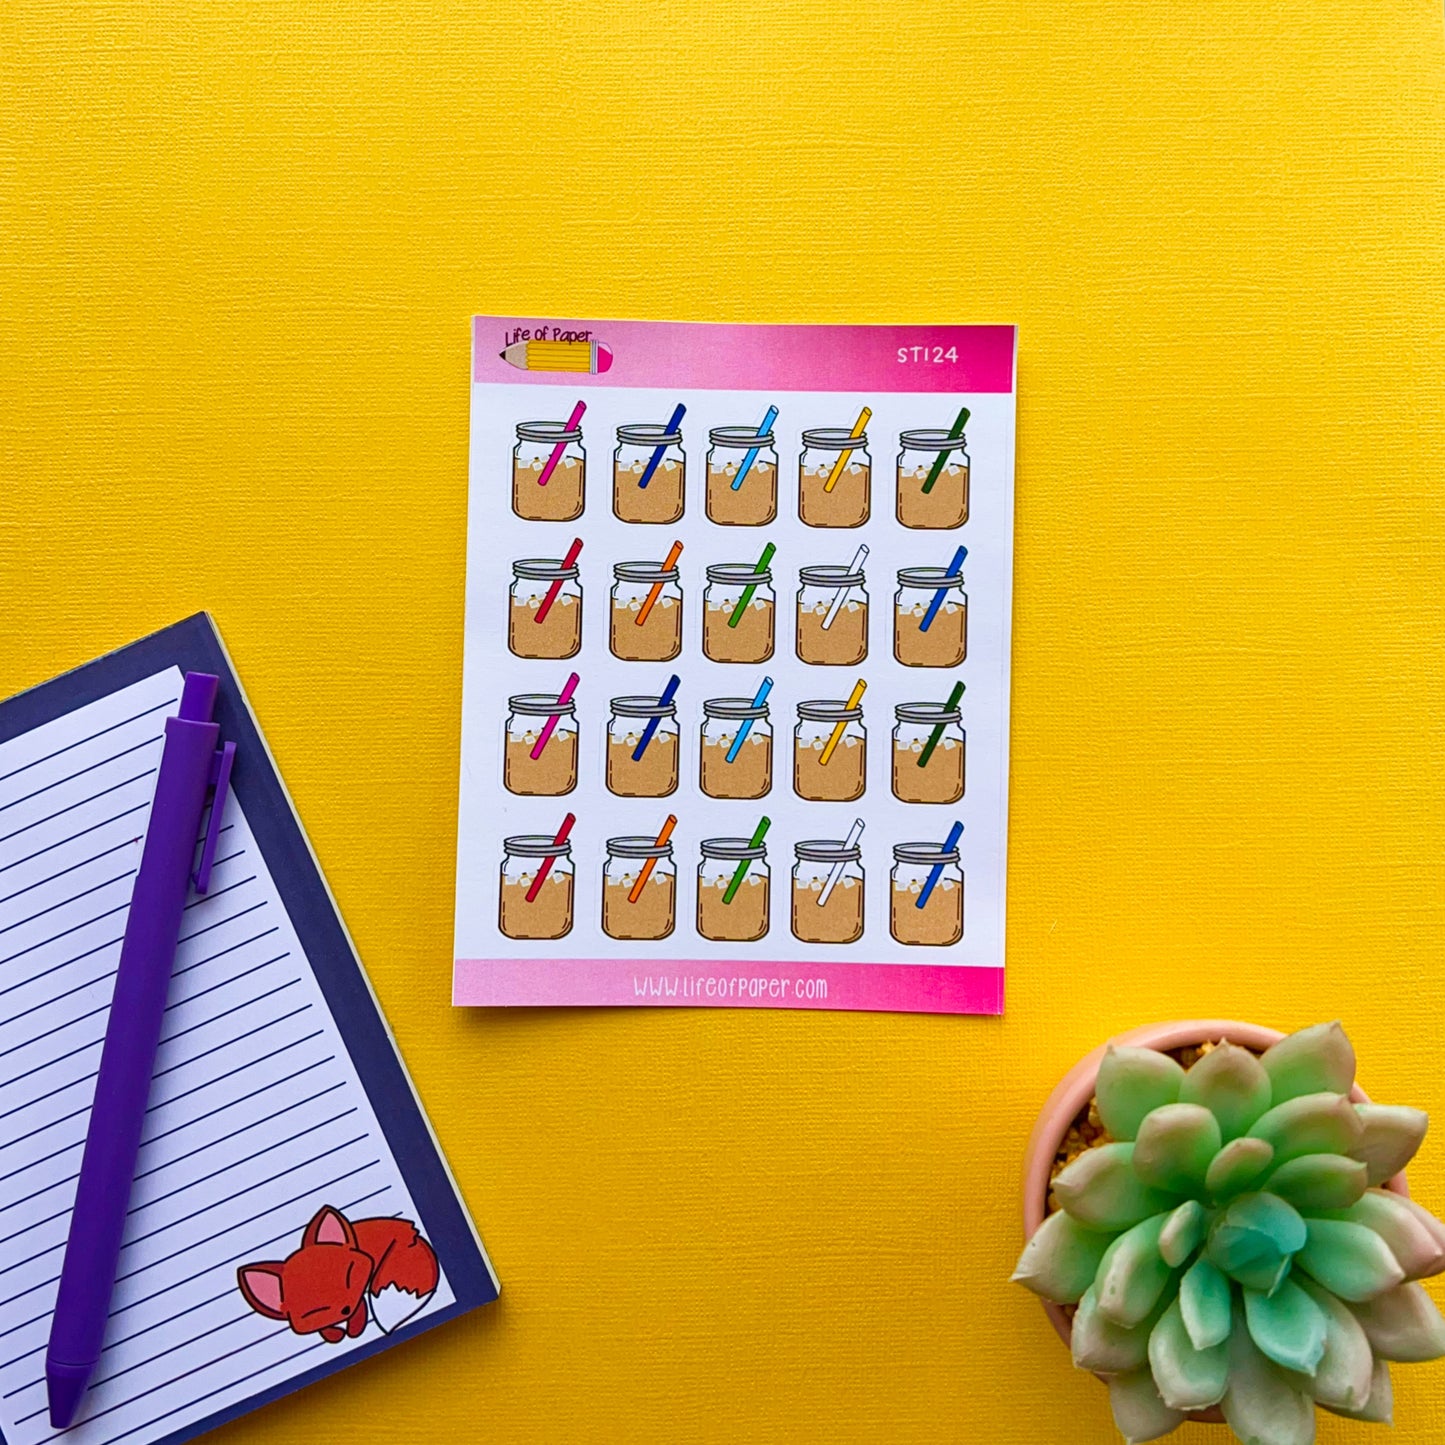 Colorful sheet of Mason Coffee Jar Planner Stickers with vibrant designs attached to a yellow board. To the left, there is a striped notepad adorned with a charming fox illustration and two pens placed on top. At the bottom right, there is a small, green succulent plant adding a touch of nature.